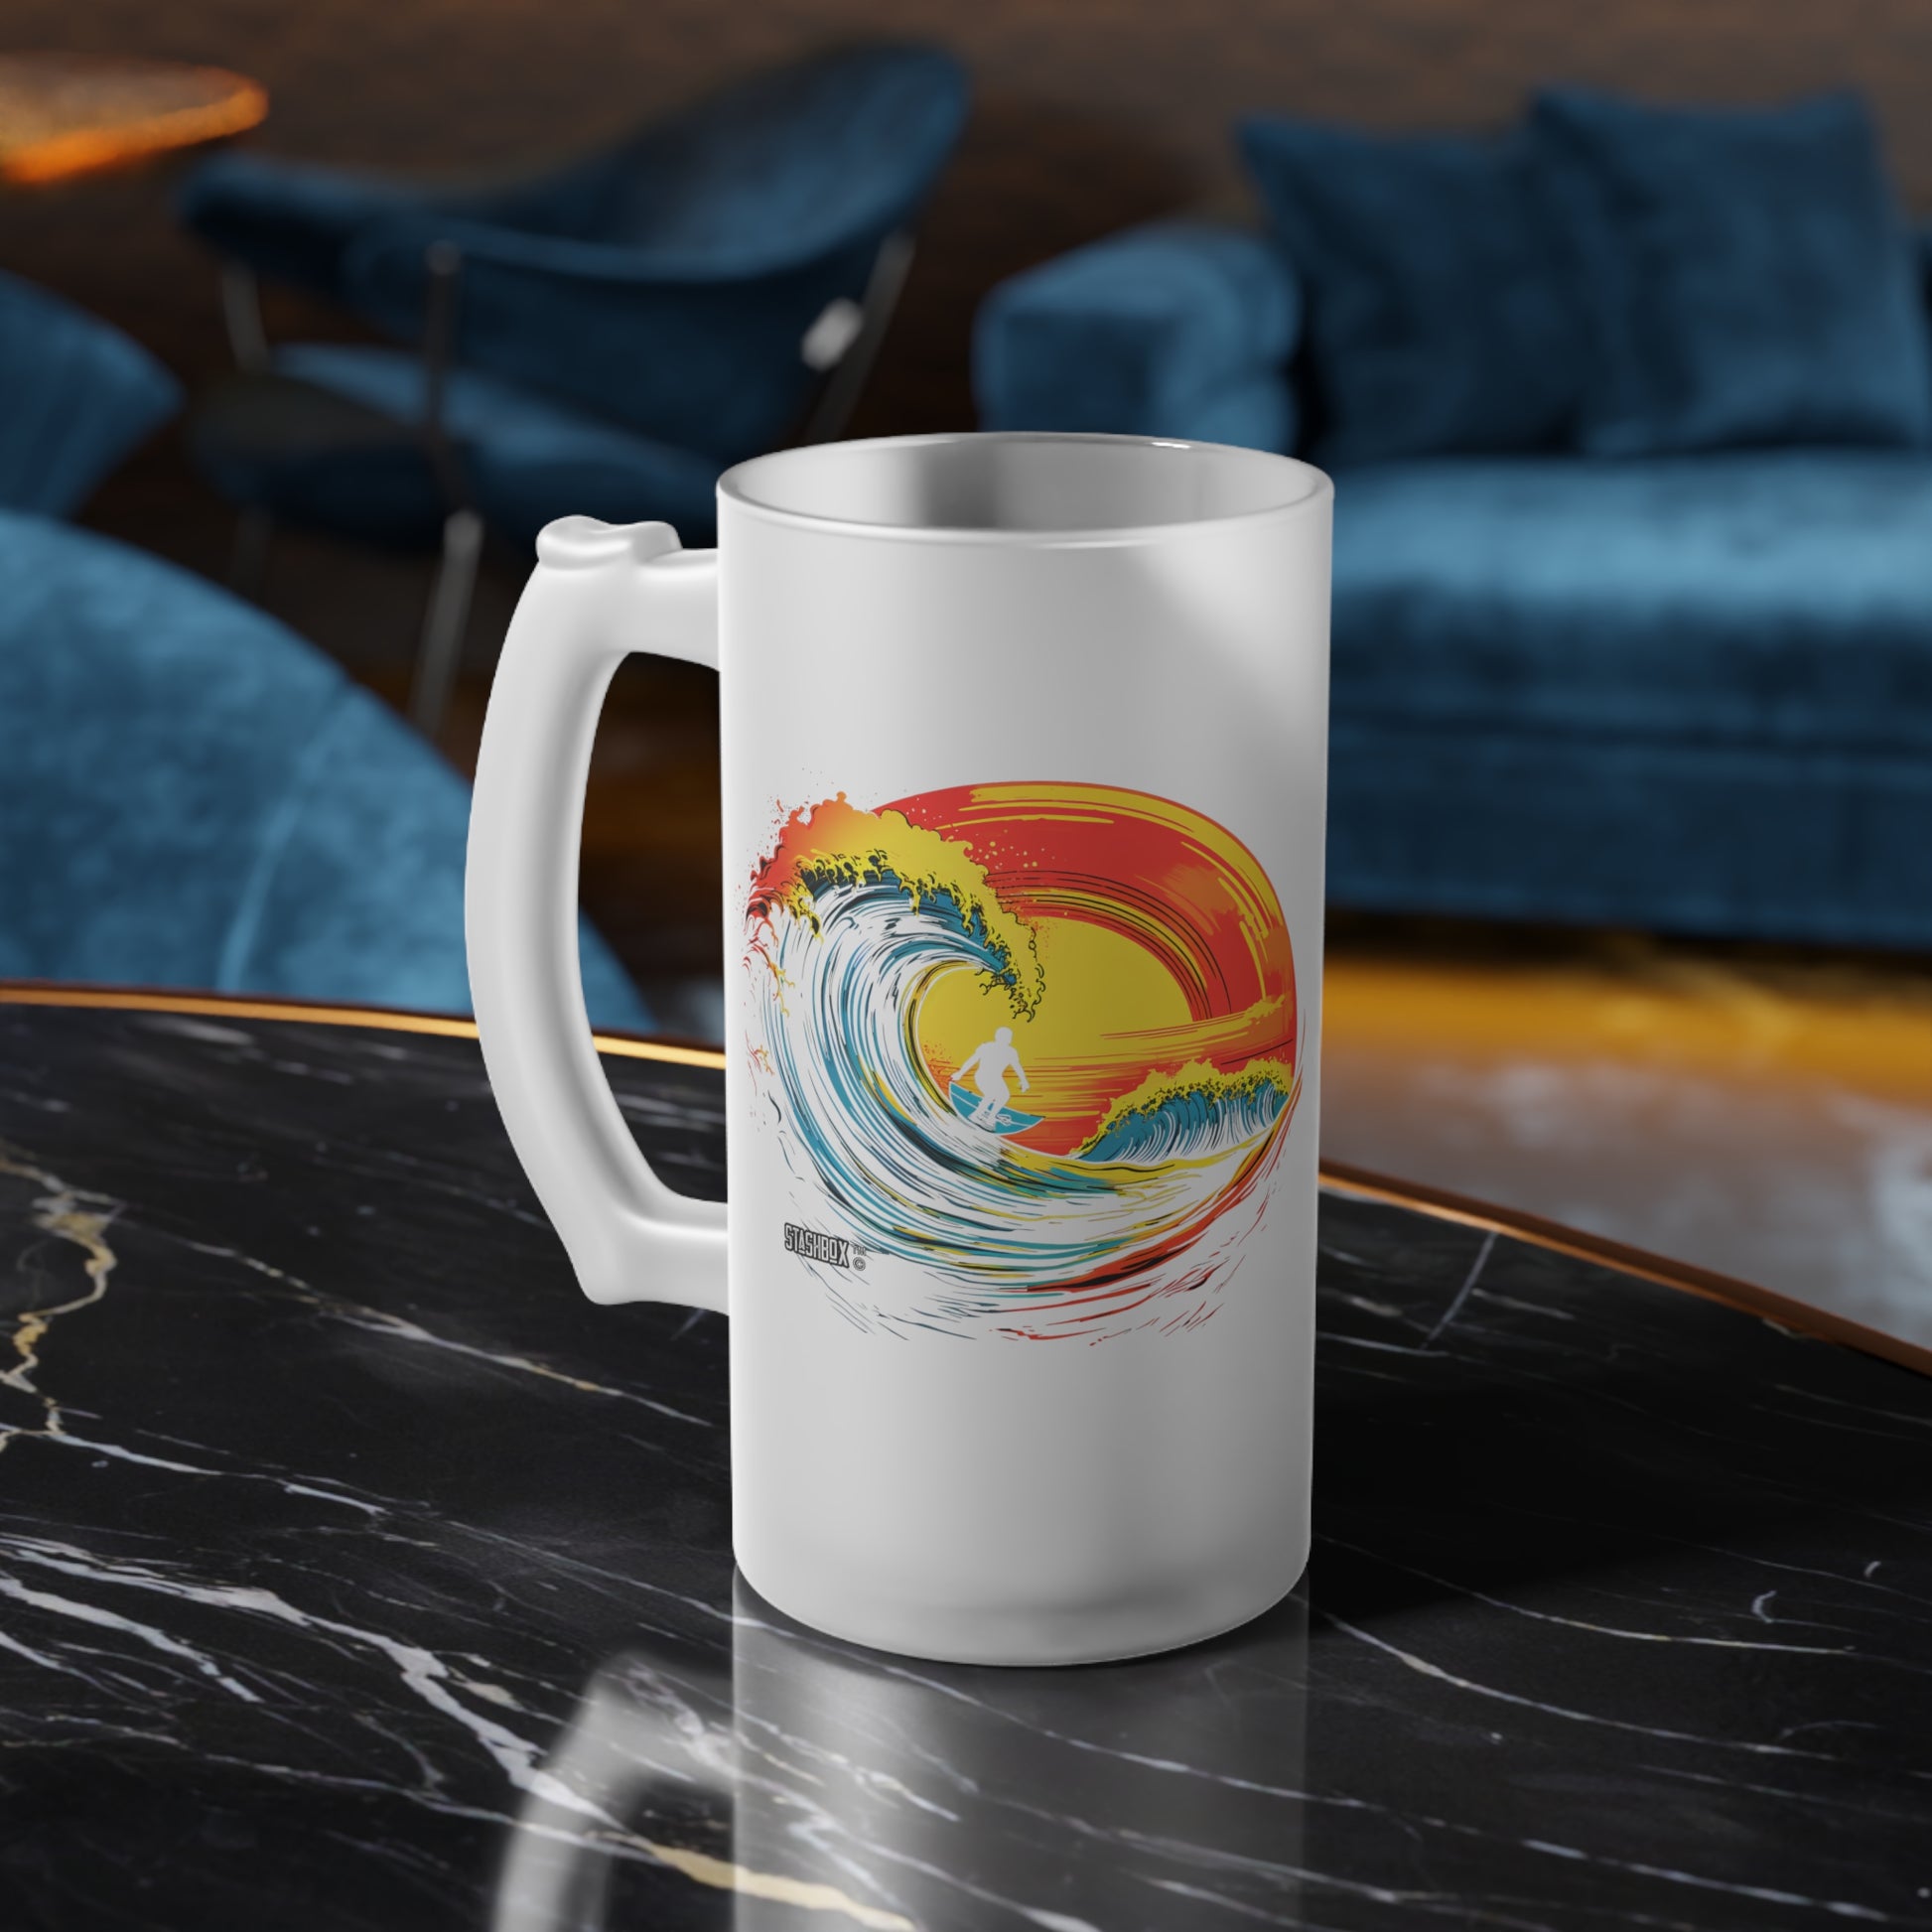 Surf in style with our Classic Surfing Design Beer Mug, 16oz. 2 Designs in 1 - Waves Design #66. Your ticket to surf culture, exclusively at Stashbox.ai.